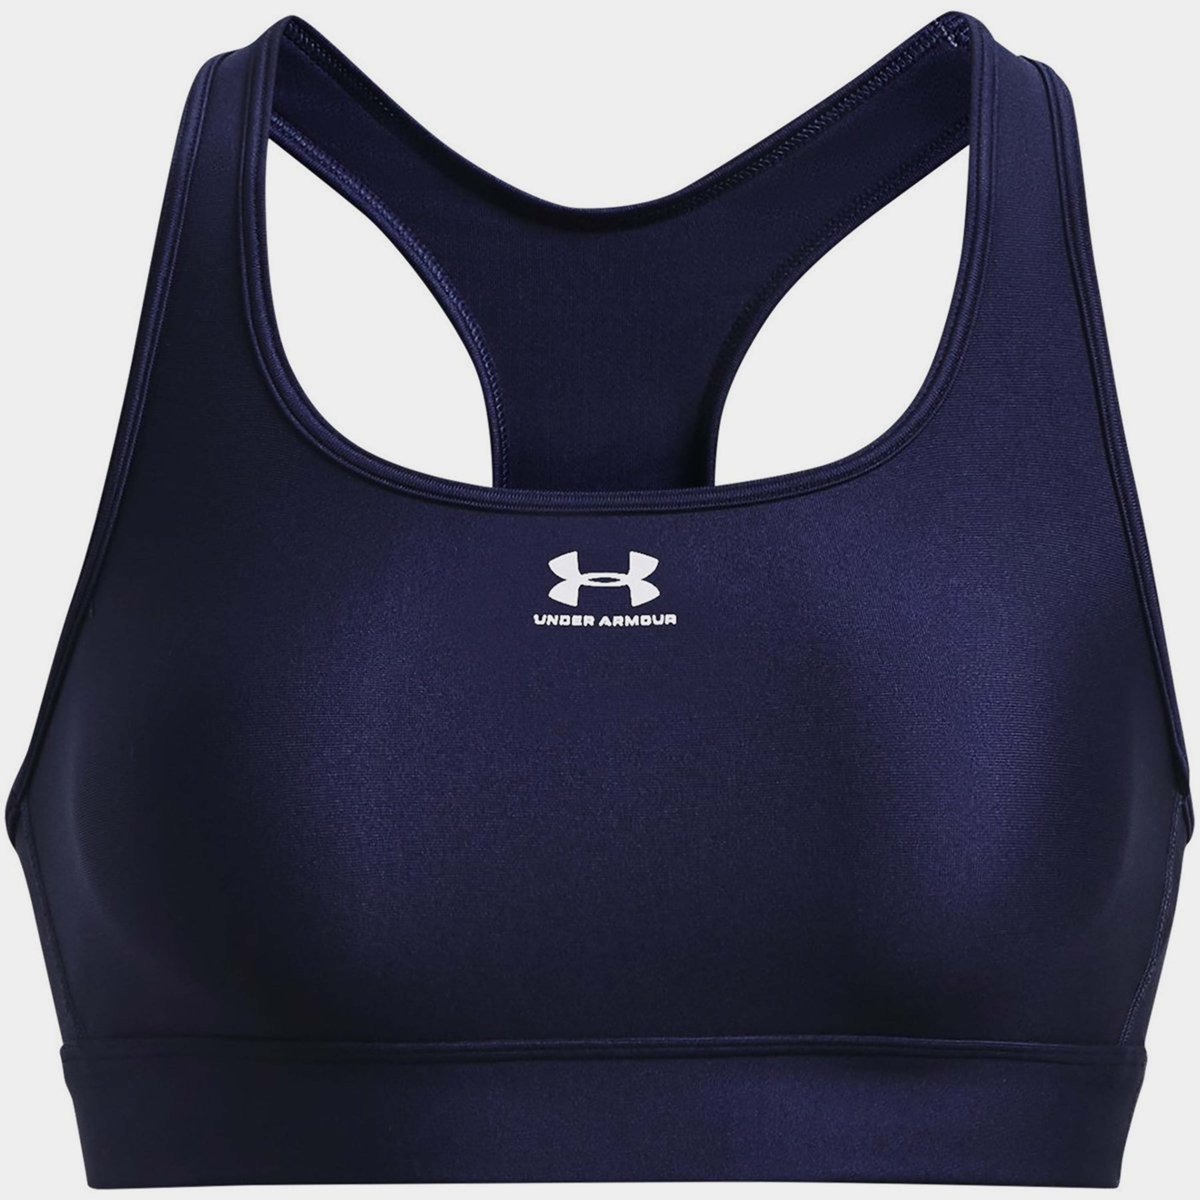 Sports Bras - Lovell Rugby